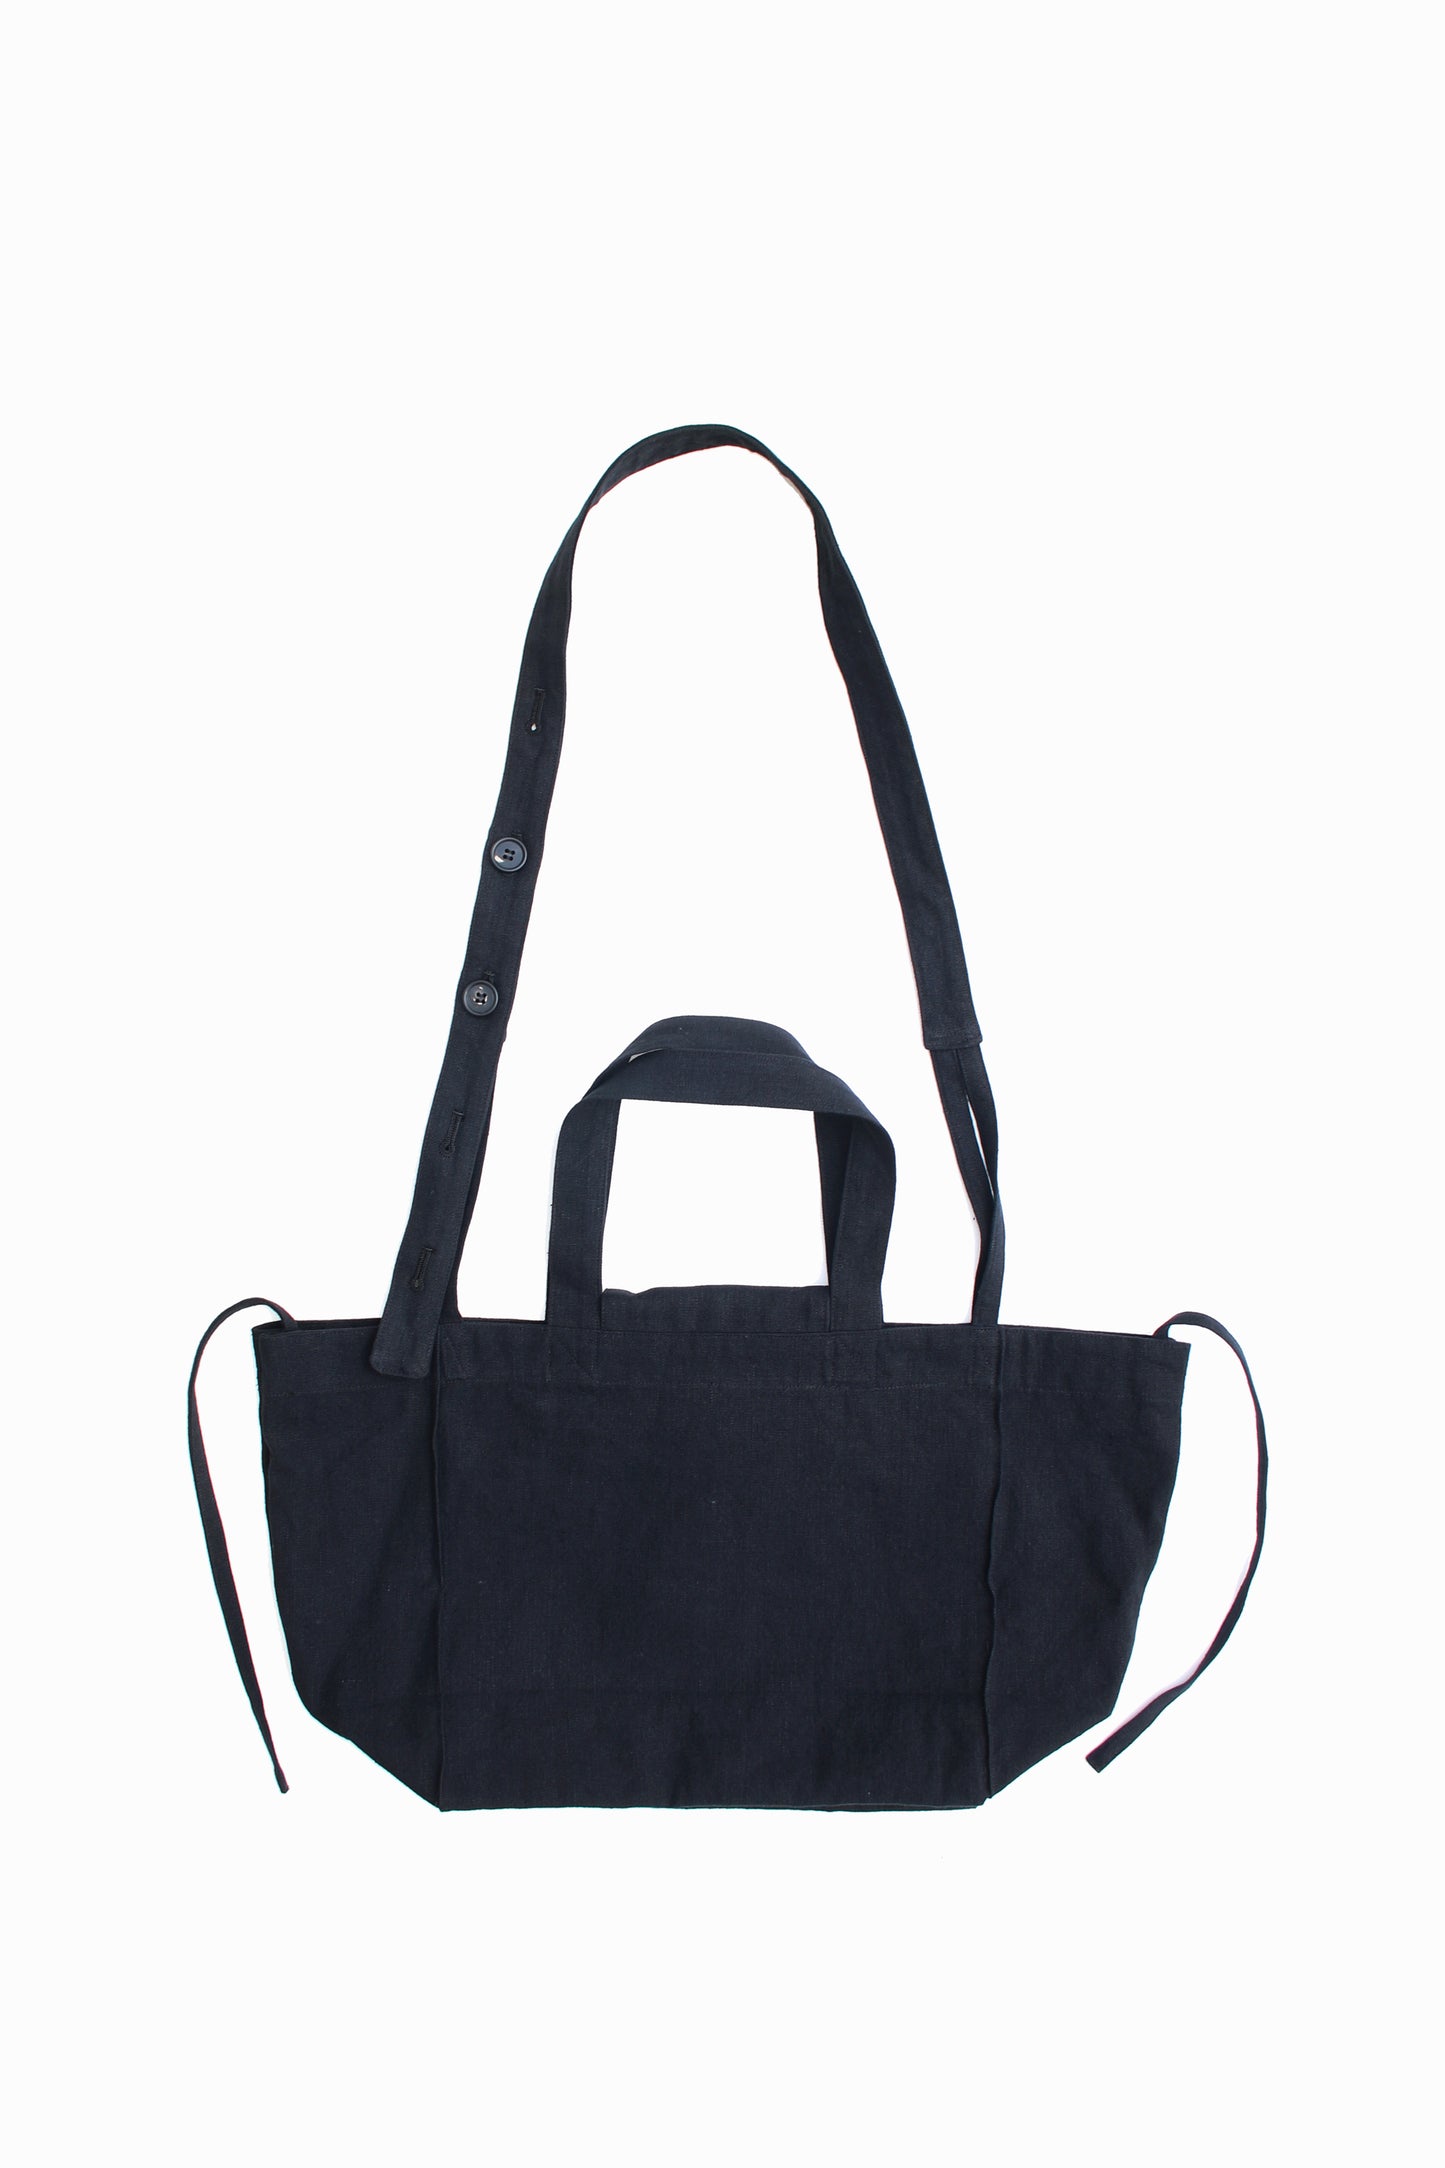 O PROJECT CANVAS 2WAY SMALL CARRIER BAG - BLACK